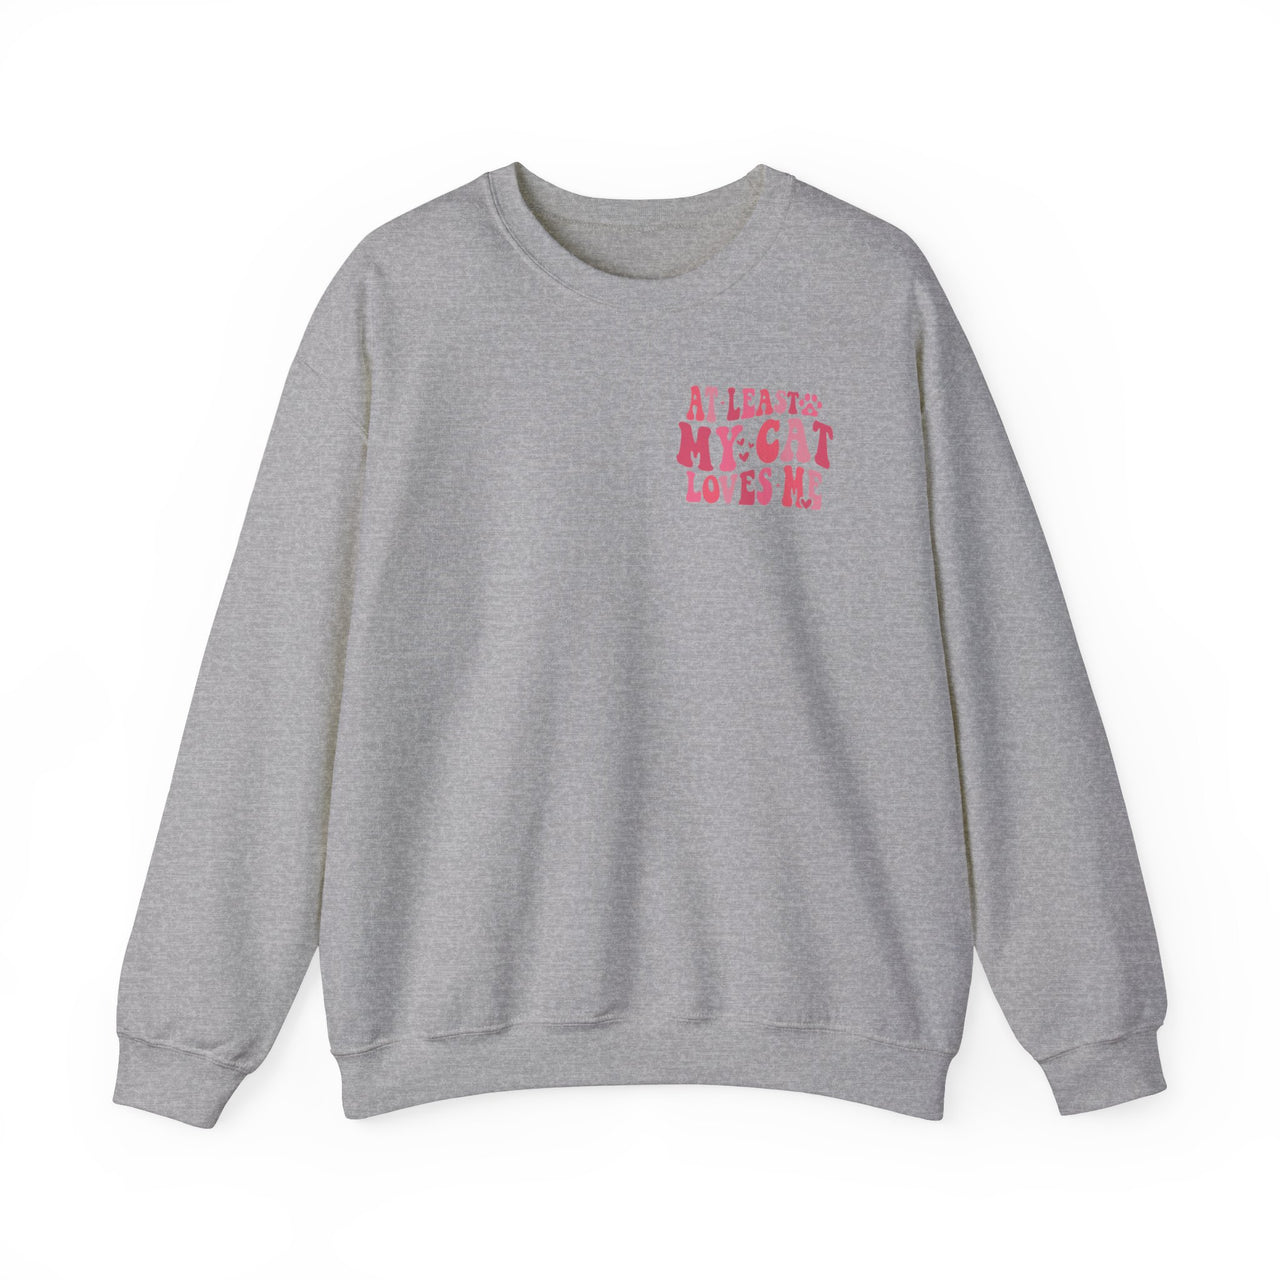 At Least My Cat Loves Me Sweatshirt-Sport Grey-Front